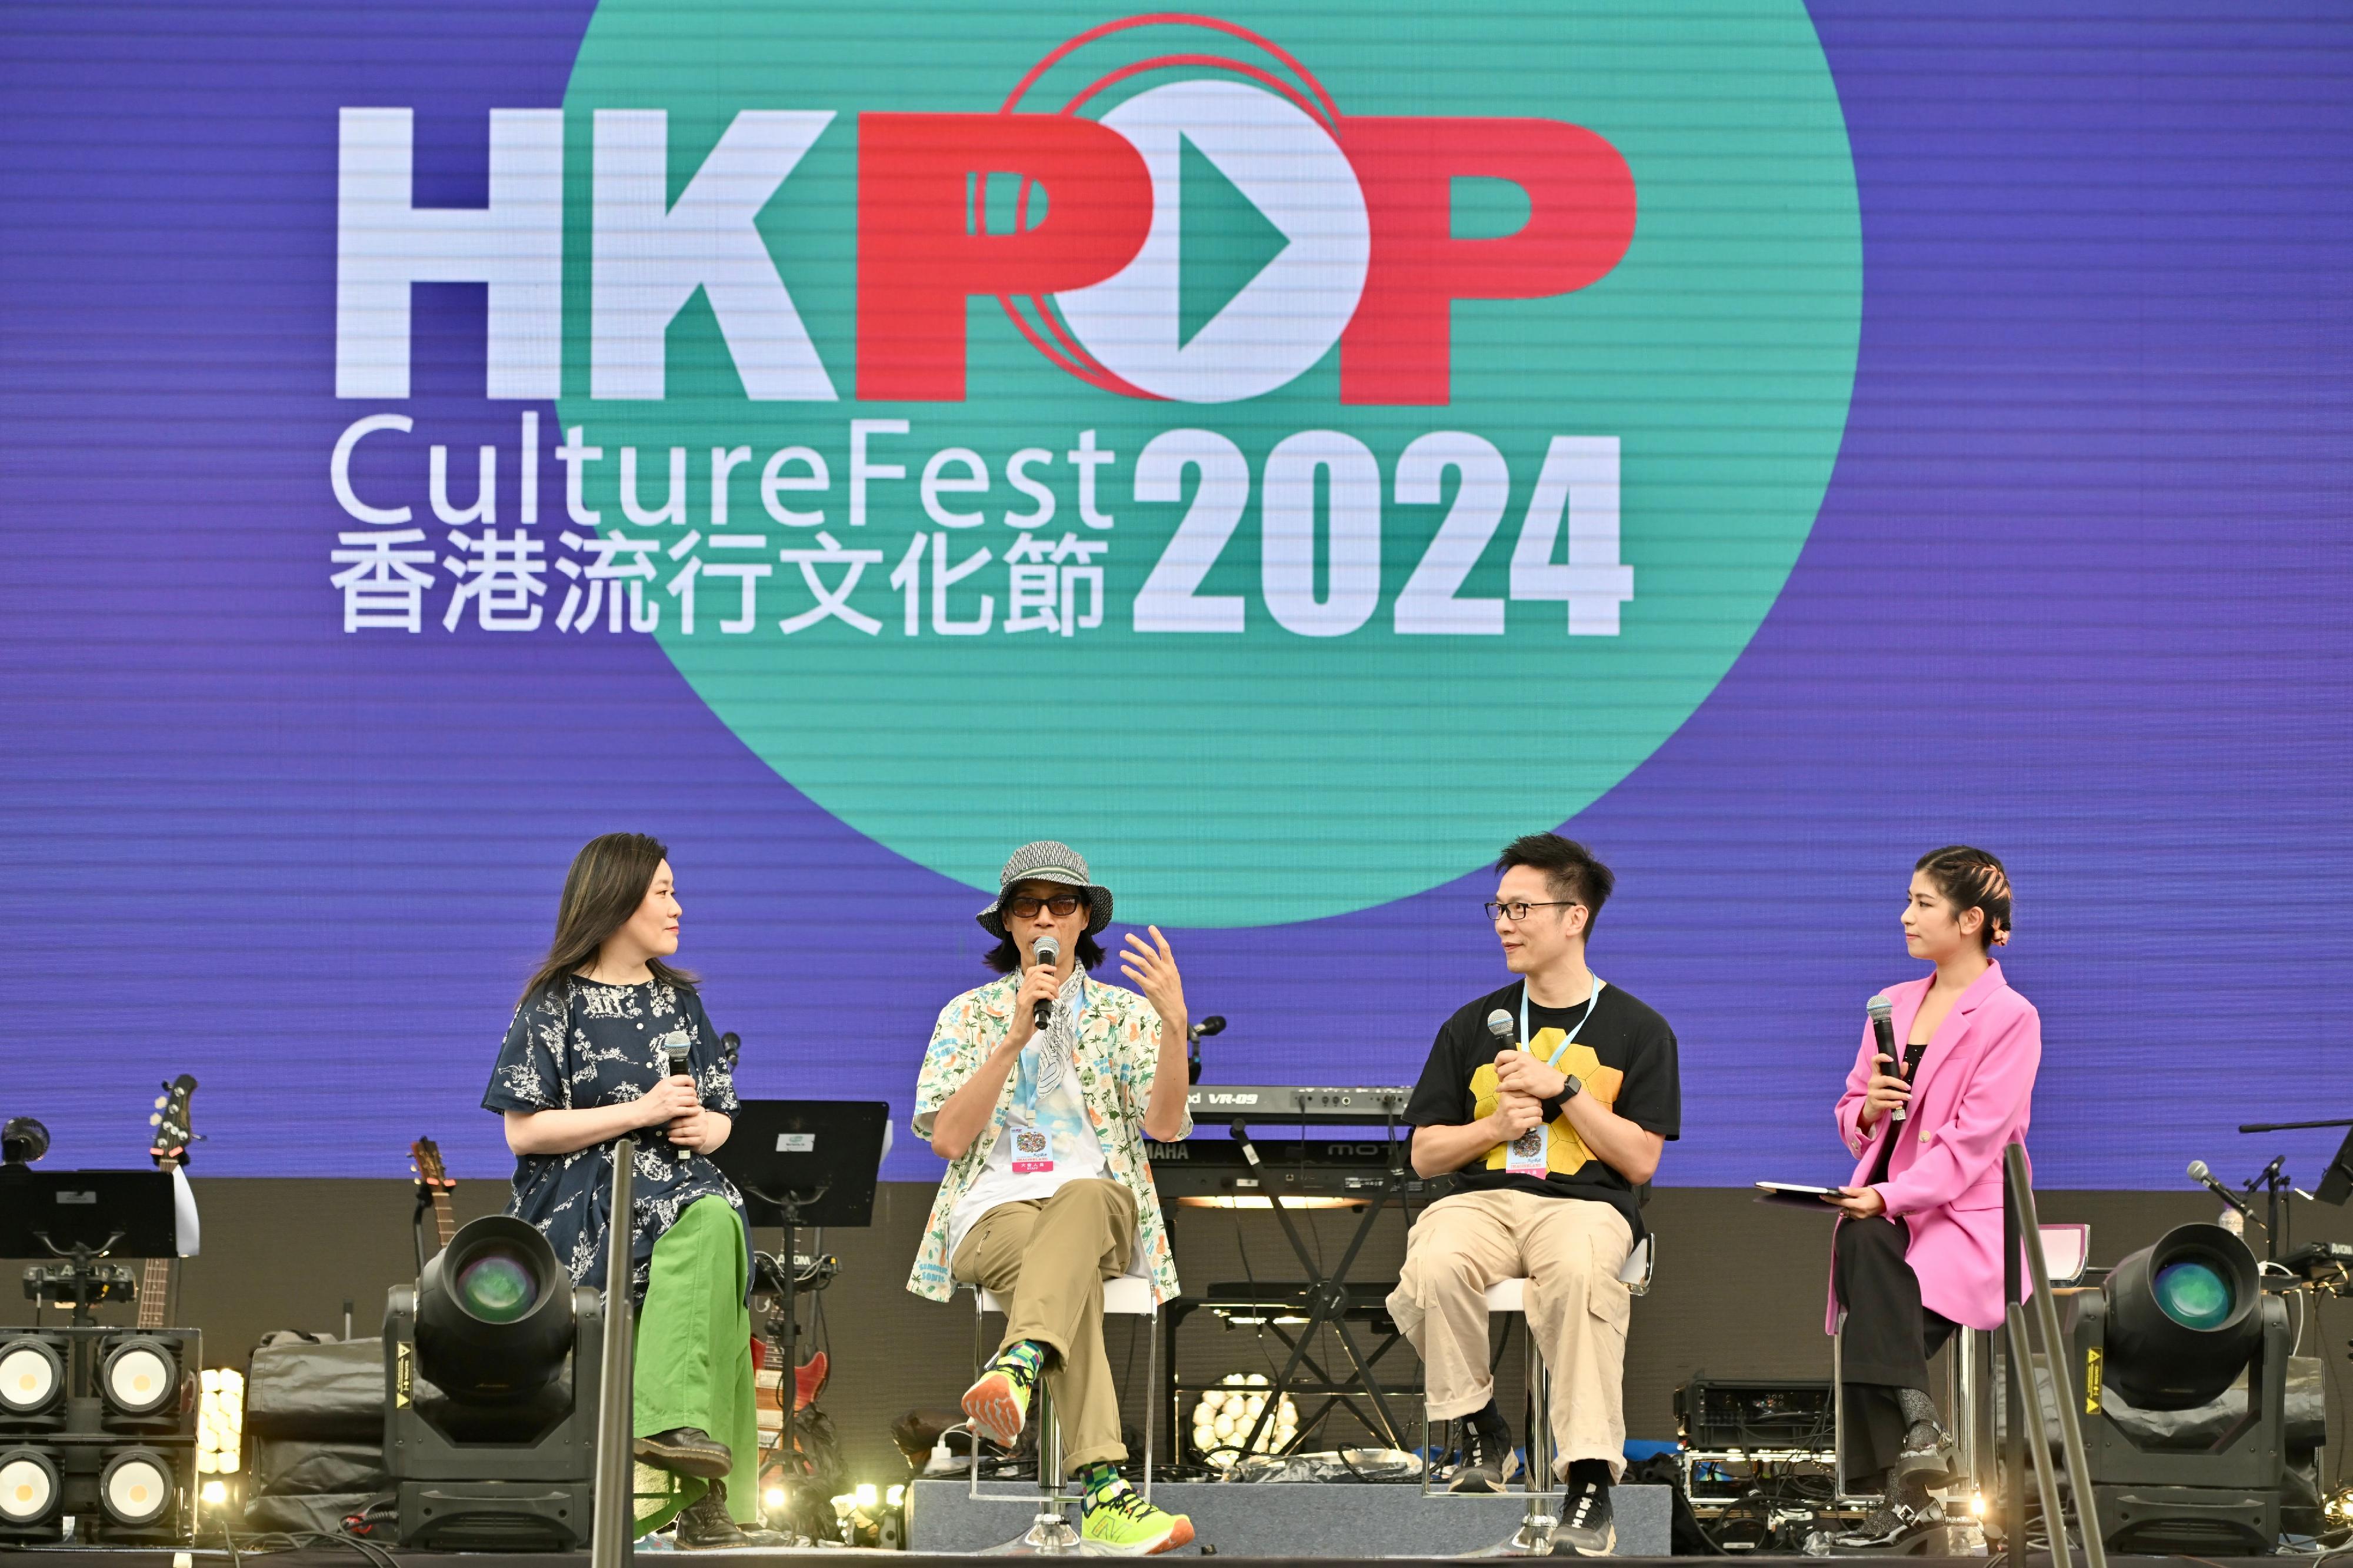 The second Hong Kong Pop Culture Festival presented by the Leisure and Cultural Services Department will open tomorrow (April 6). With "Arts and Action" as its theme, this year's festival takes audiences on a journey through time to explore the diverse charms of Hong Kong's pop culture. Photo shows three music curators of the opening programme "ImagineLand", (from left) Vicky Fung, Dr Wong Chi-chung and Chiu Tsang-hei, sharing their creative concepts.